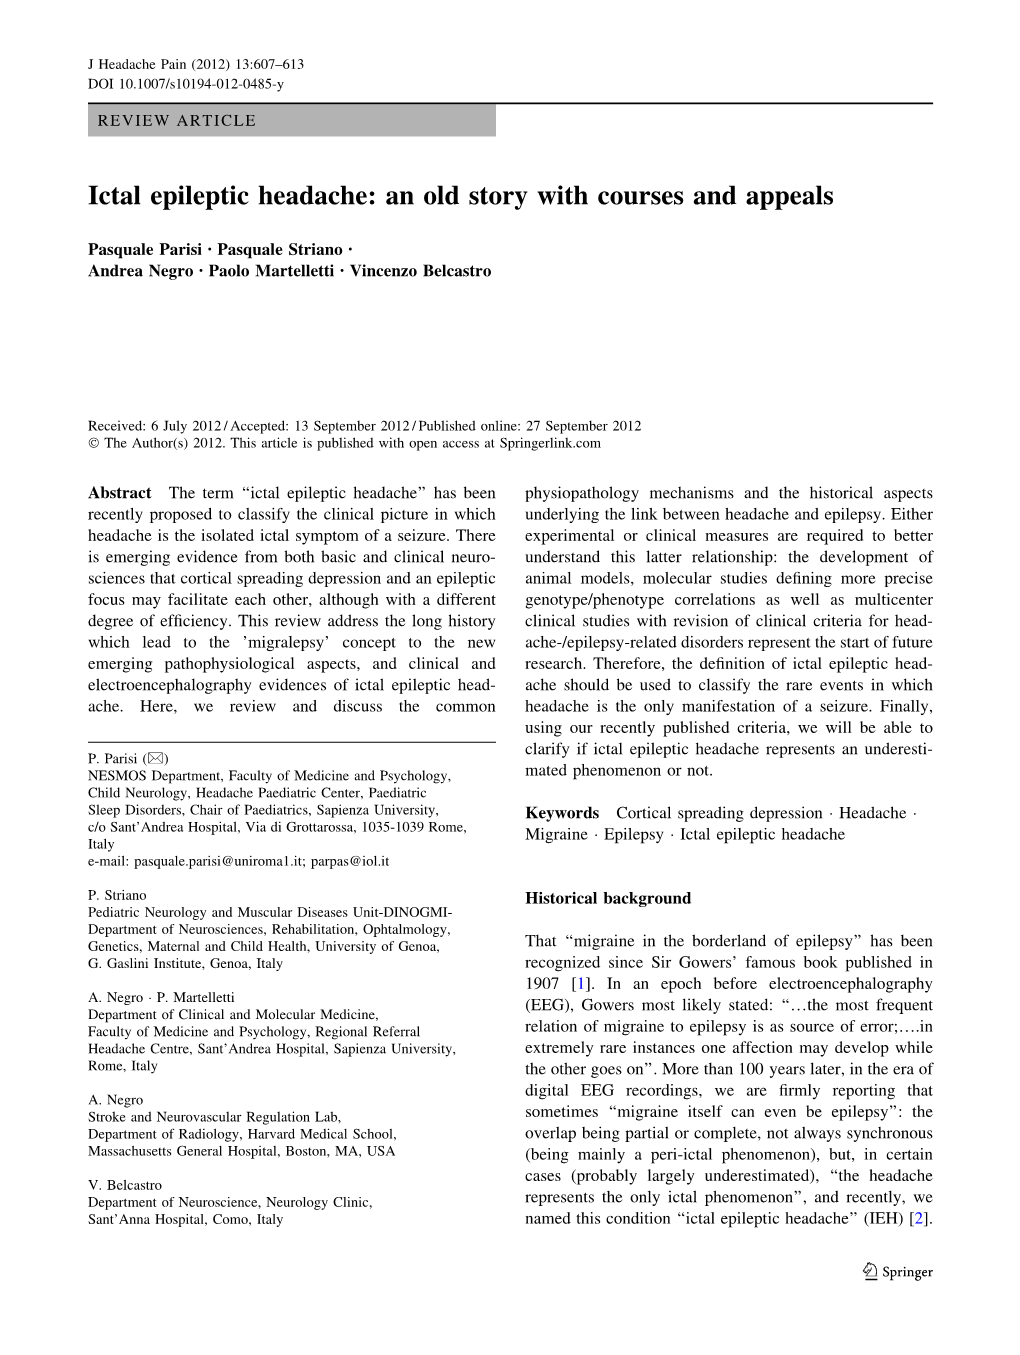 Ictal Epileptic Headache: an Old Story with Courses and Appeals